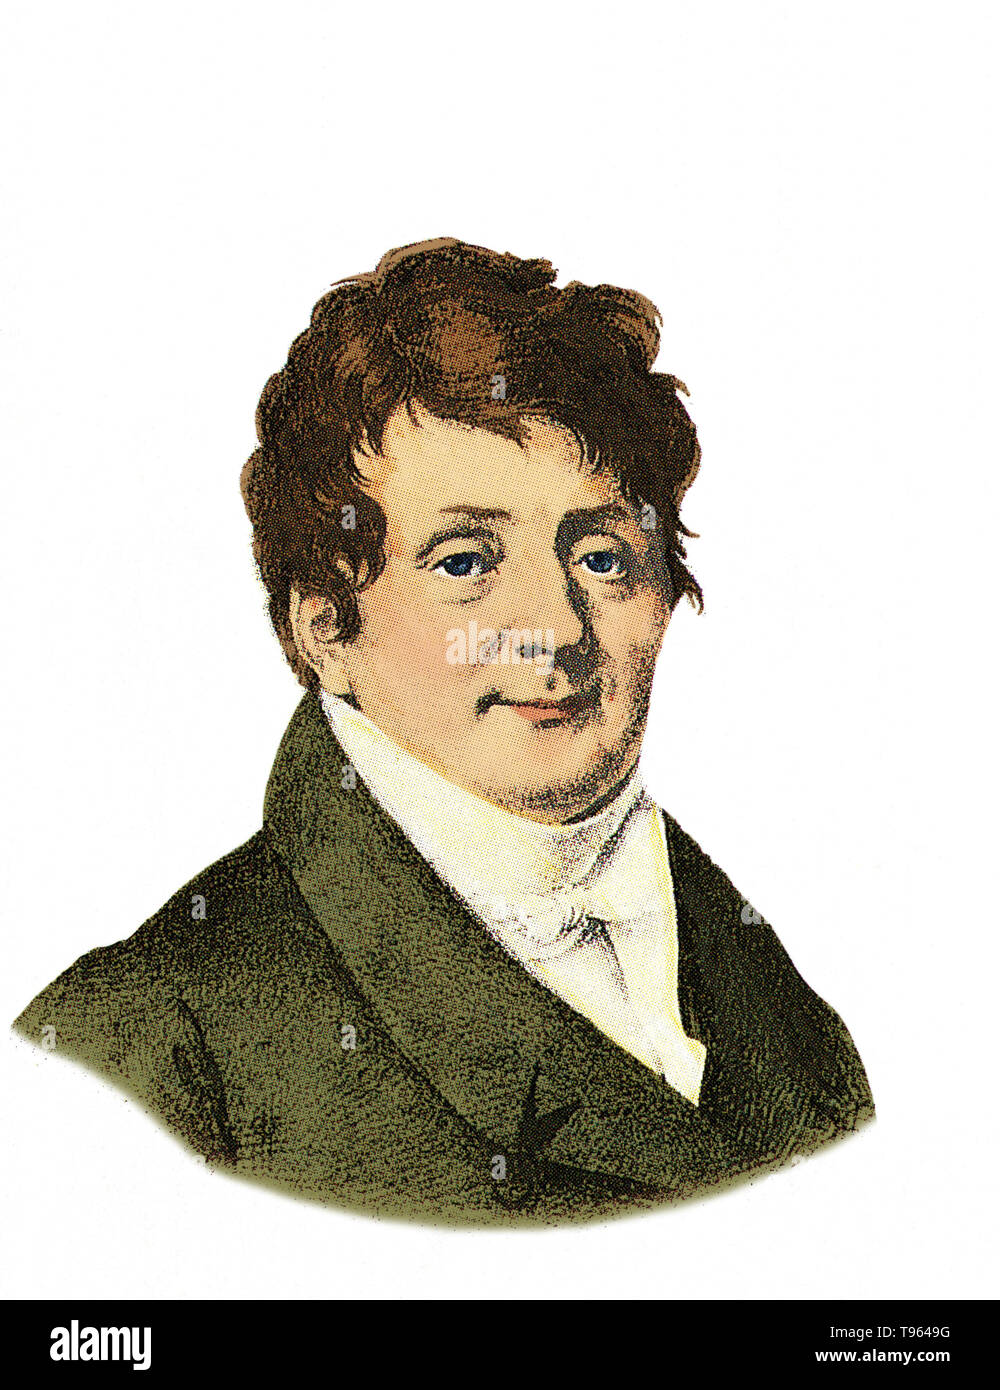 Jean Baptiste Joseph Fourier (1768-1830) was a French mathematician and physicist best known for initiating the investigation of Fourier series and their applications to problems of heat transfer and vibrations. The Fourier series is an infinite series whose terms are constants multiplied by sine and cosine functions and that can, if uniformly convergent, approximate a wide variety of functions. The Fourier transform and Fourier's Law are also named in his honor. Stock Photo